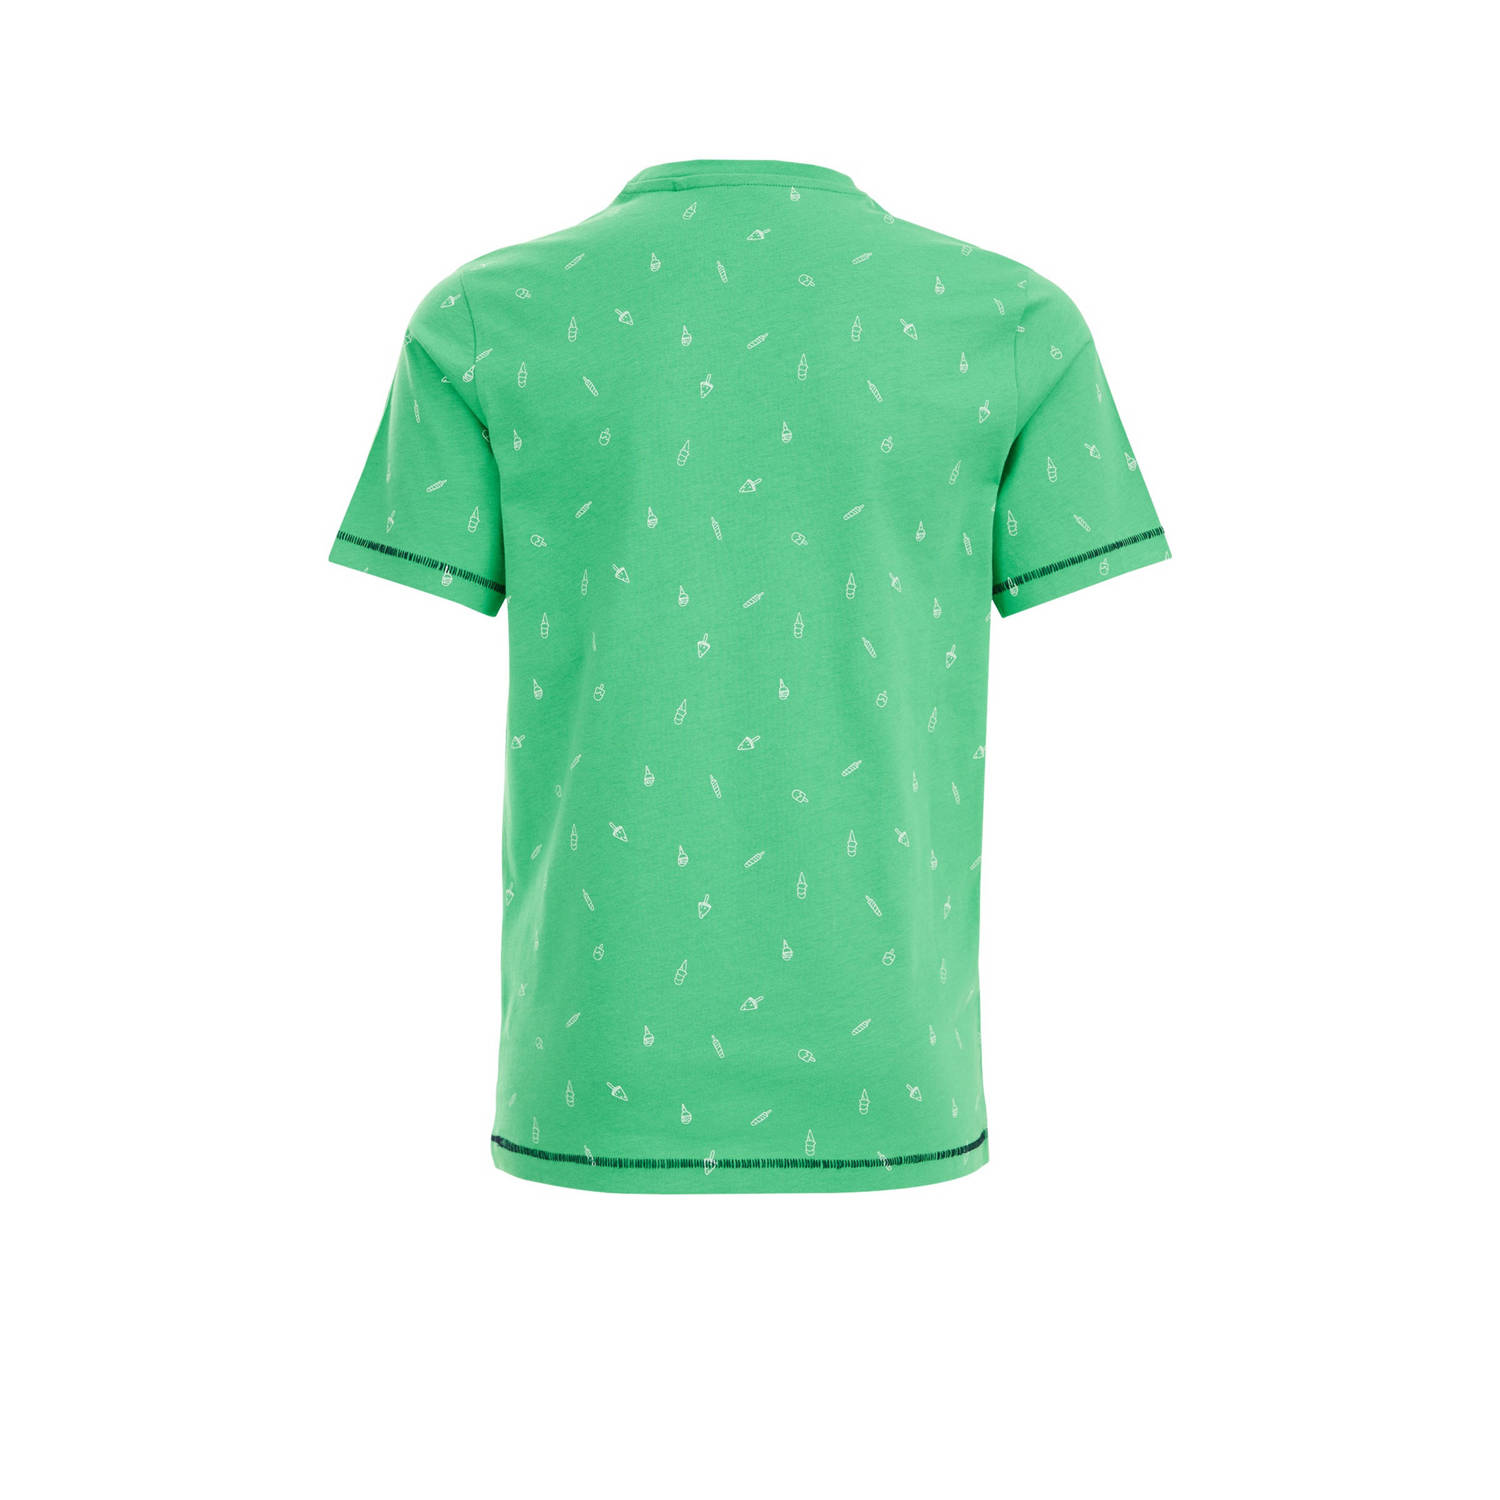 WE Fashion T-shirt met all over print groen wit